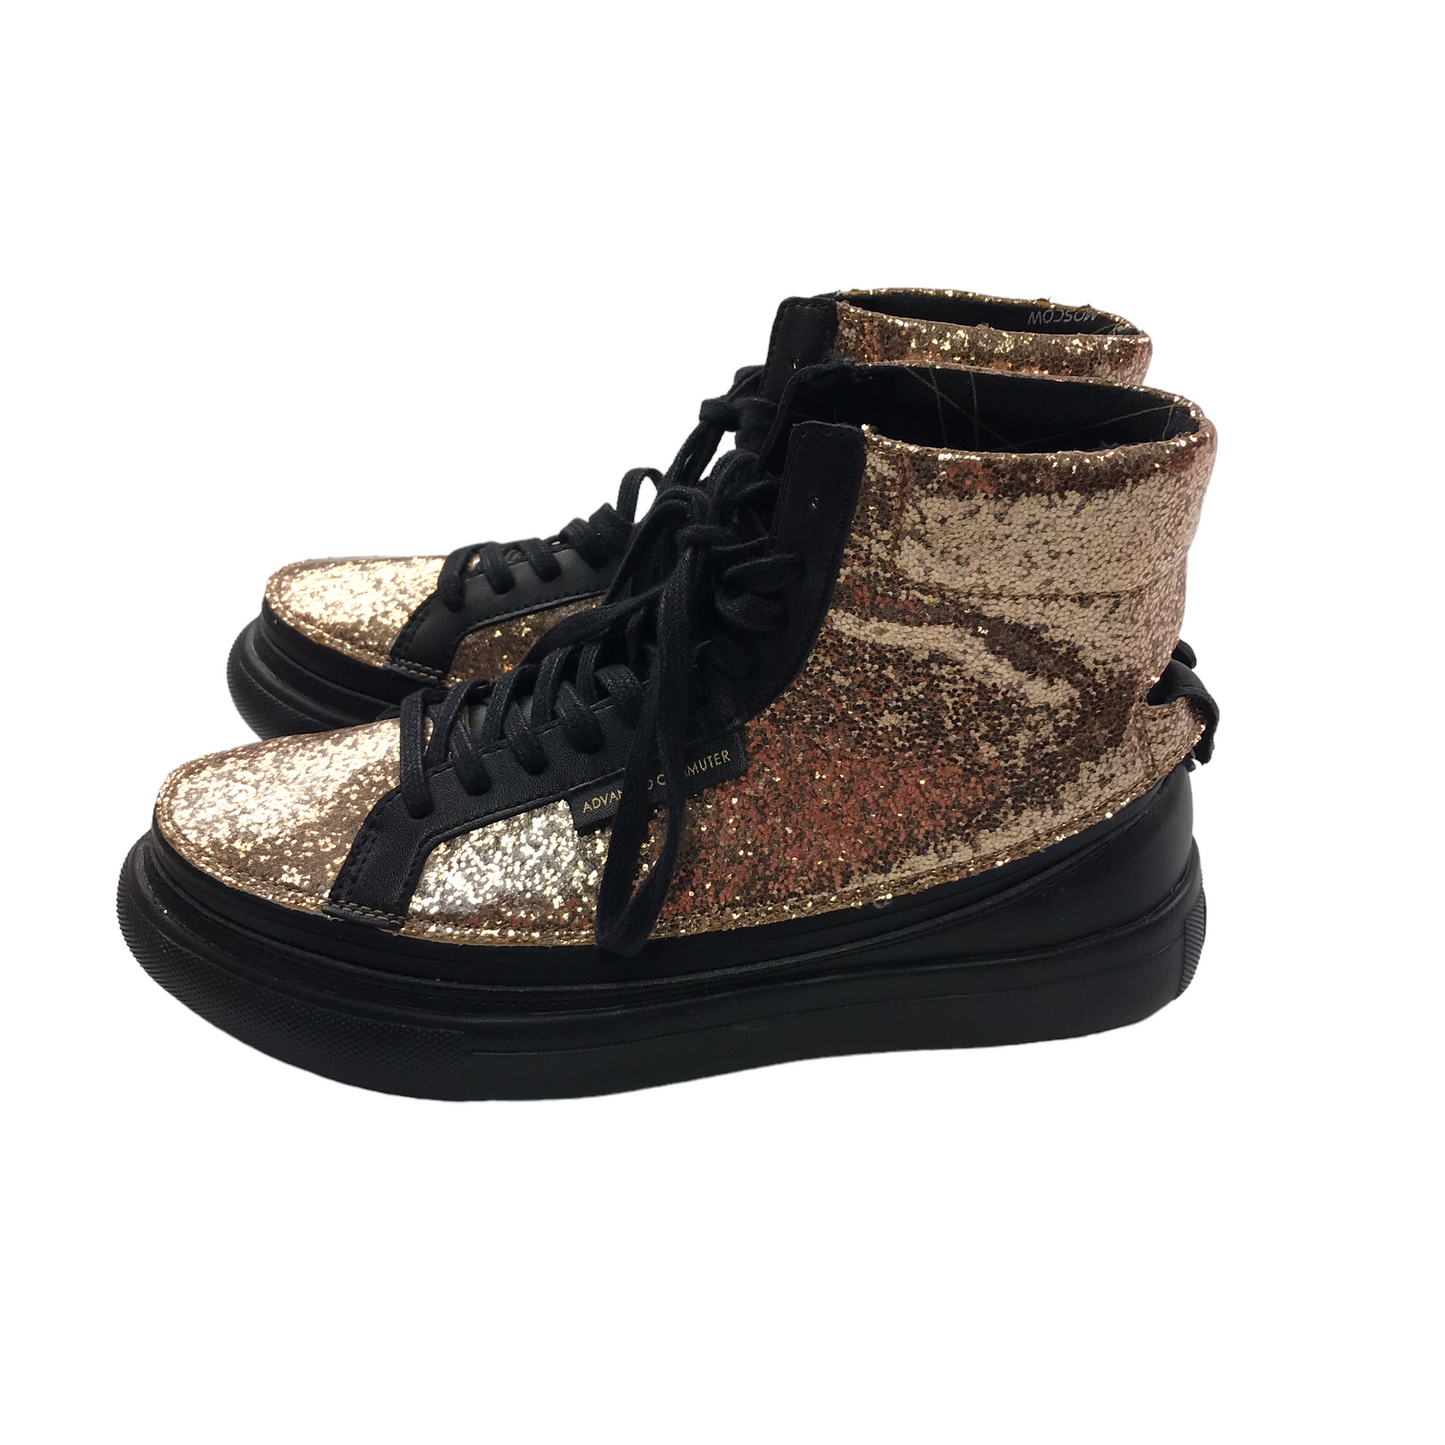 ACBC Golden Sparkly Modular High Tops Trainers Shoe Size 3